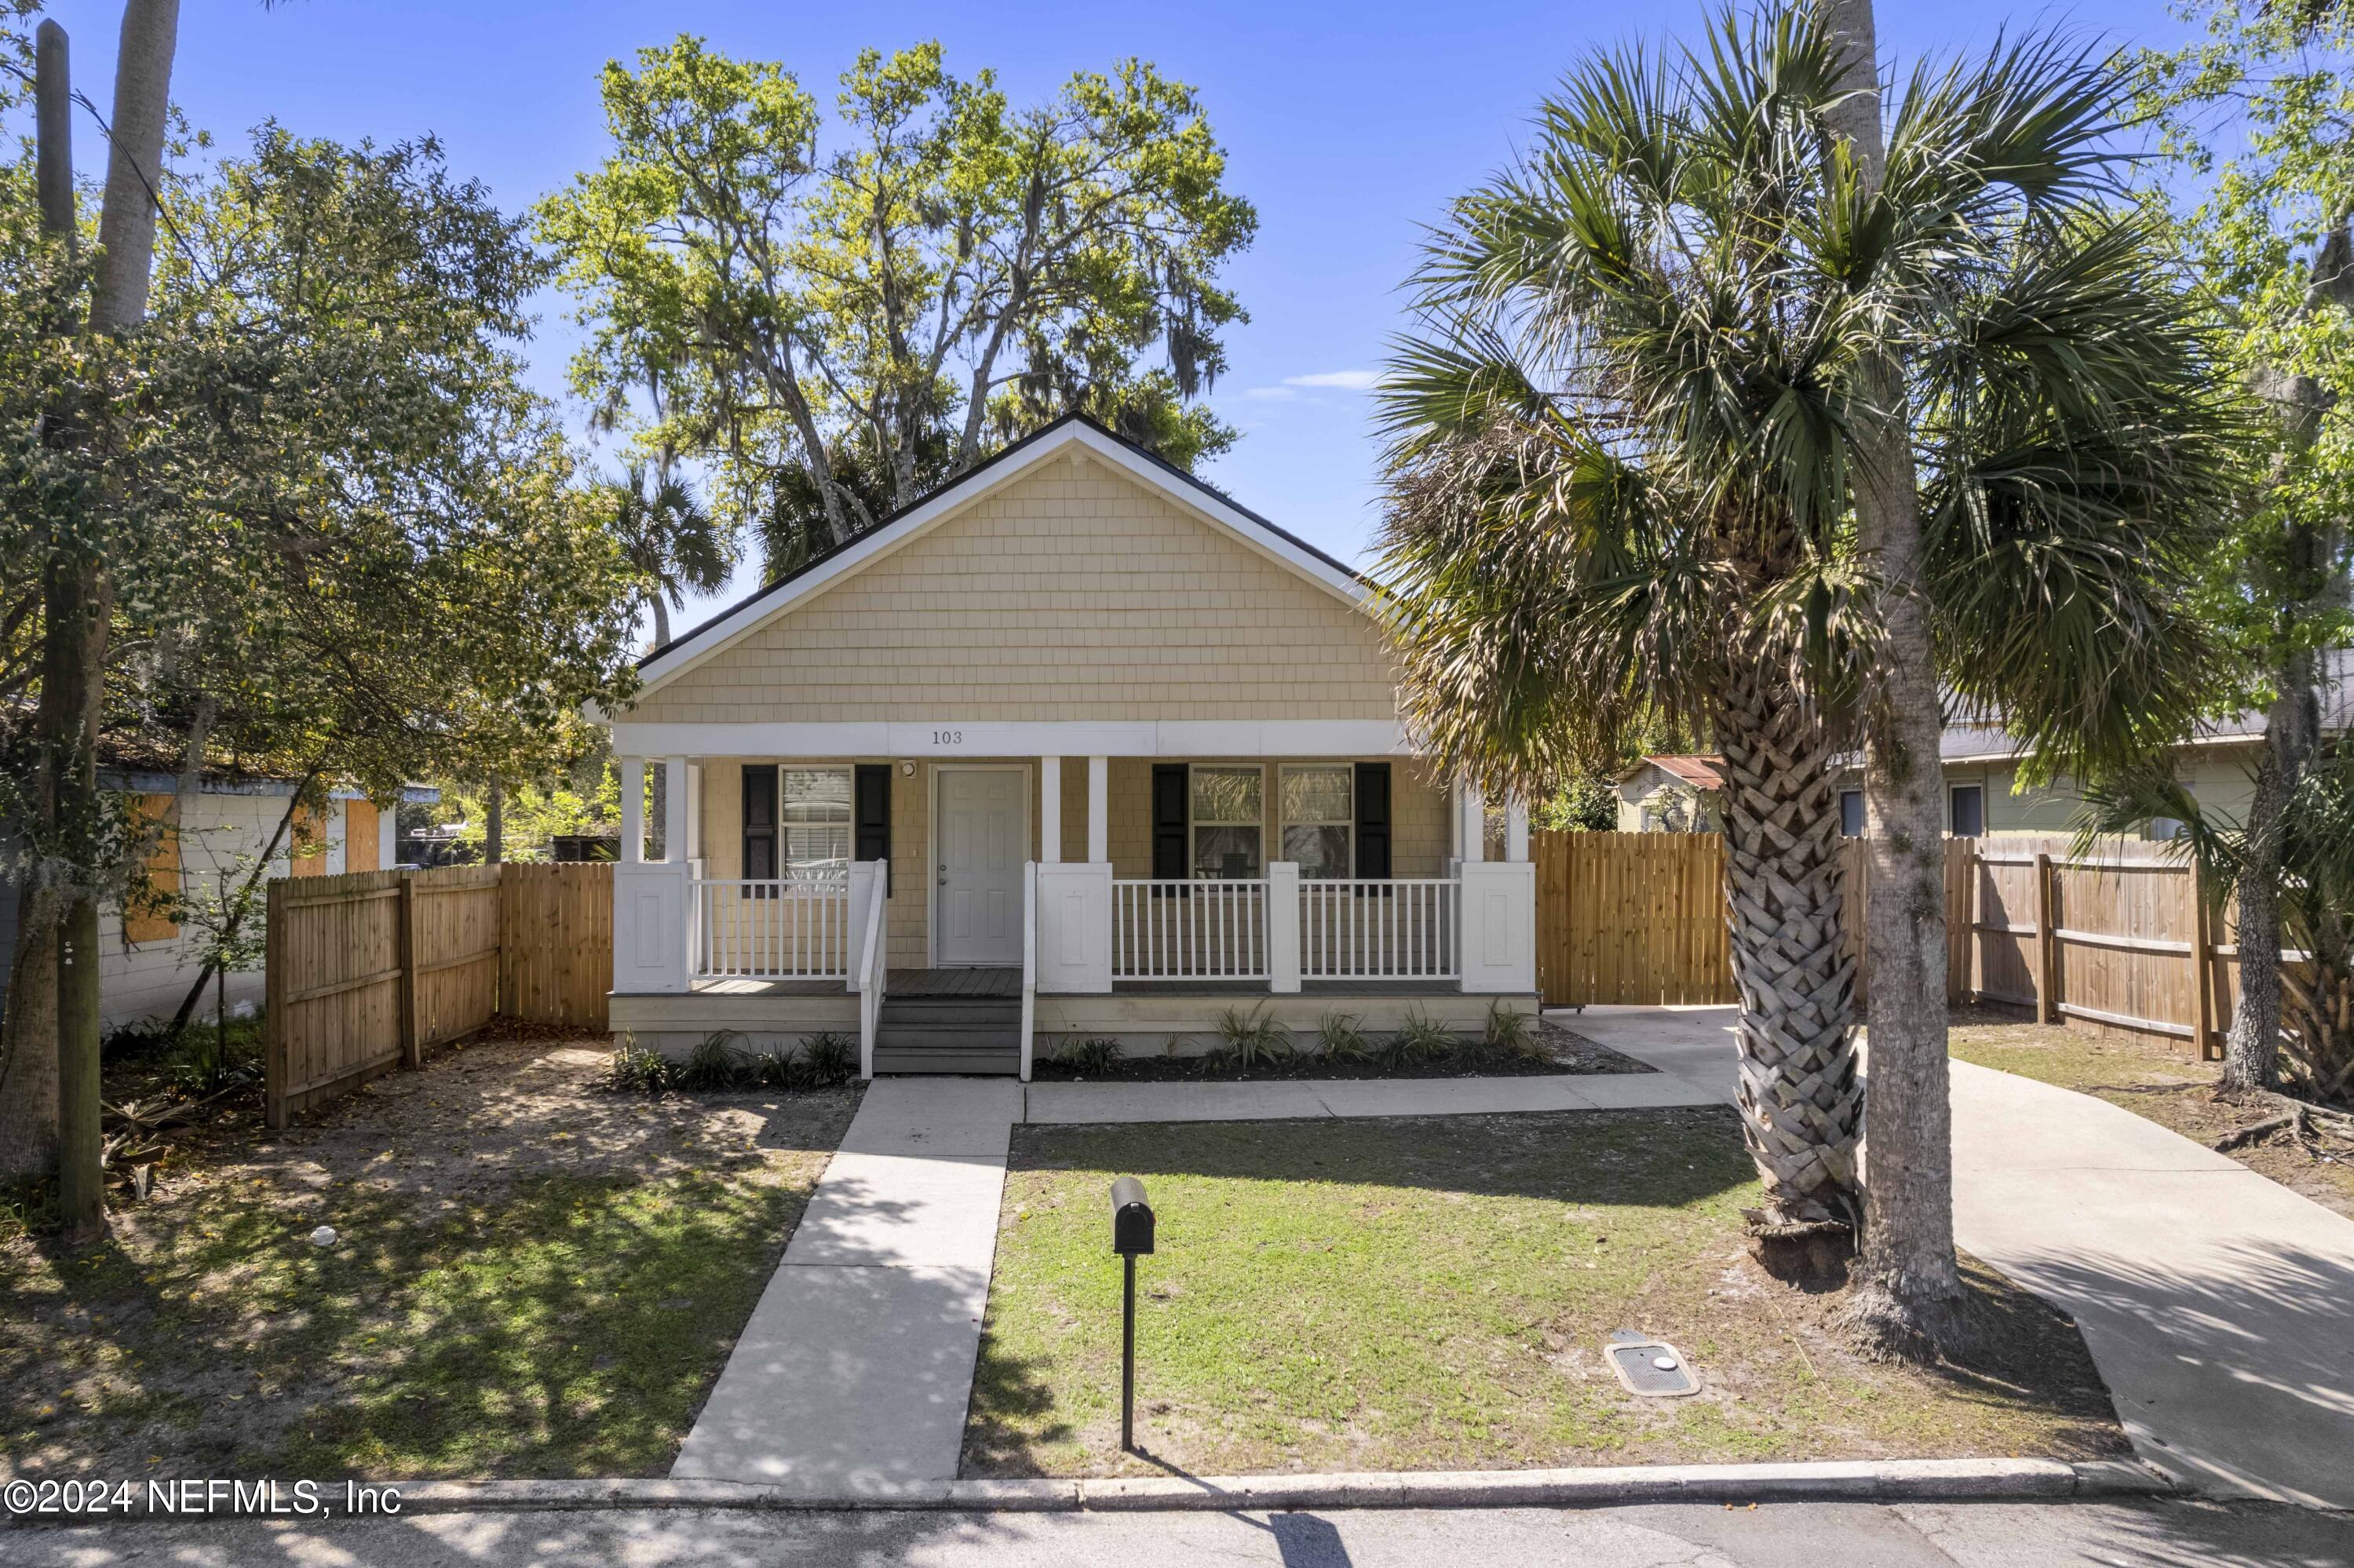 St Augustine, FL home for sale located at 103 Chapin Street, St Augustine, FL 32084